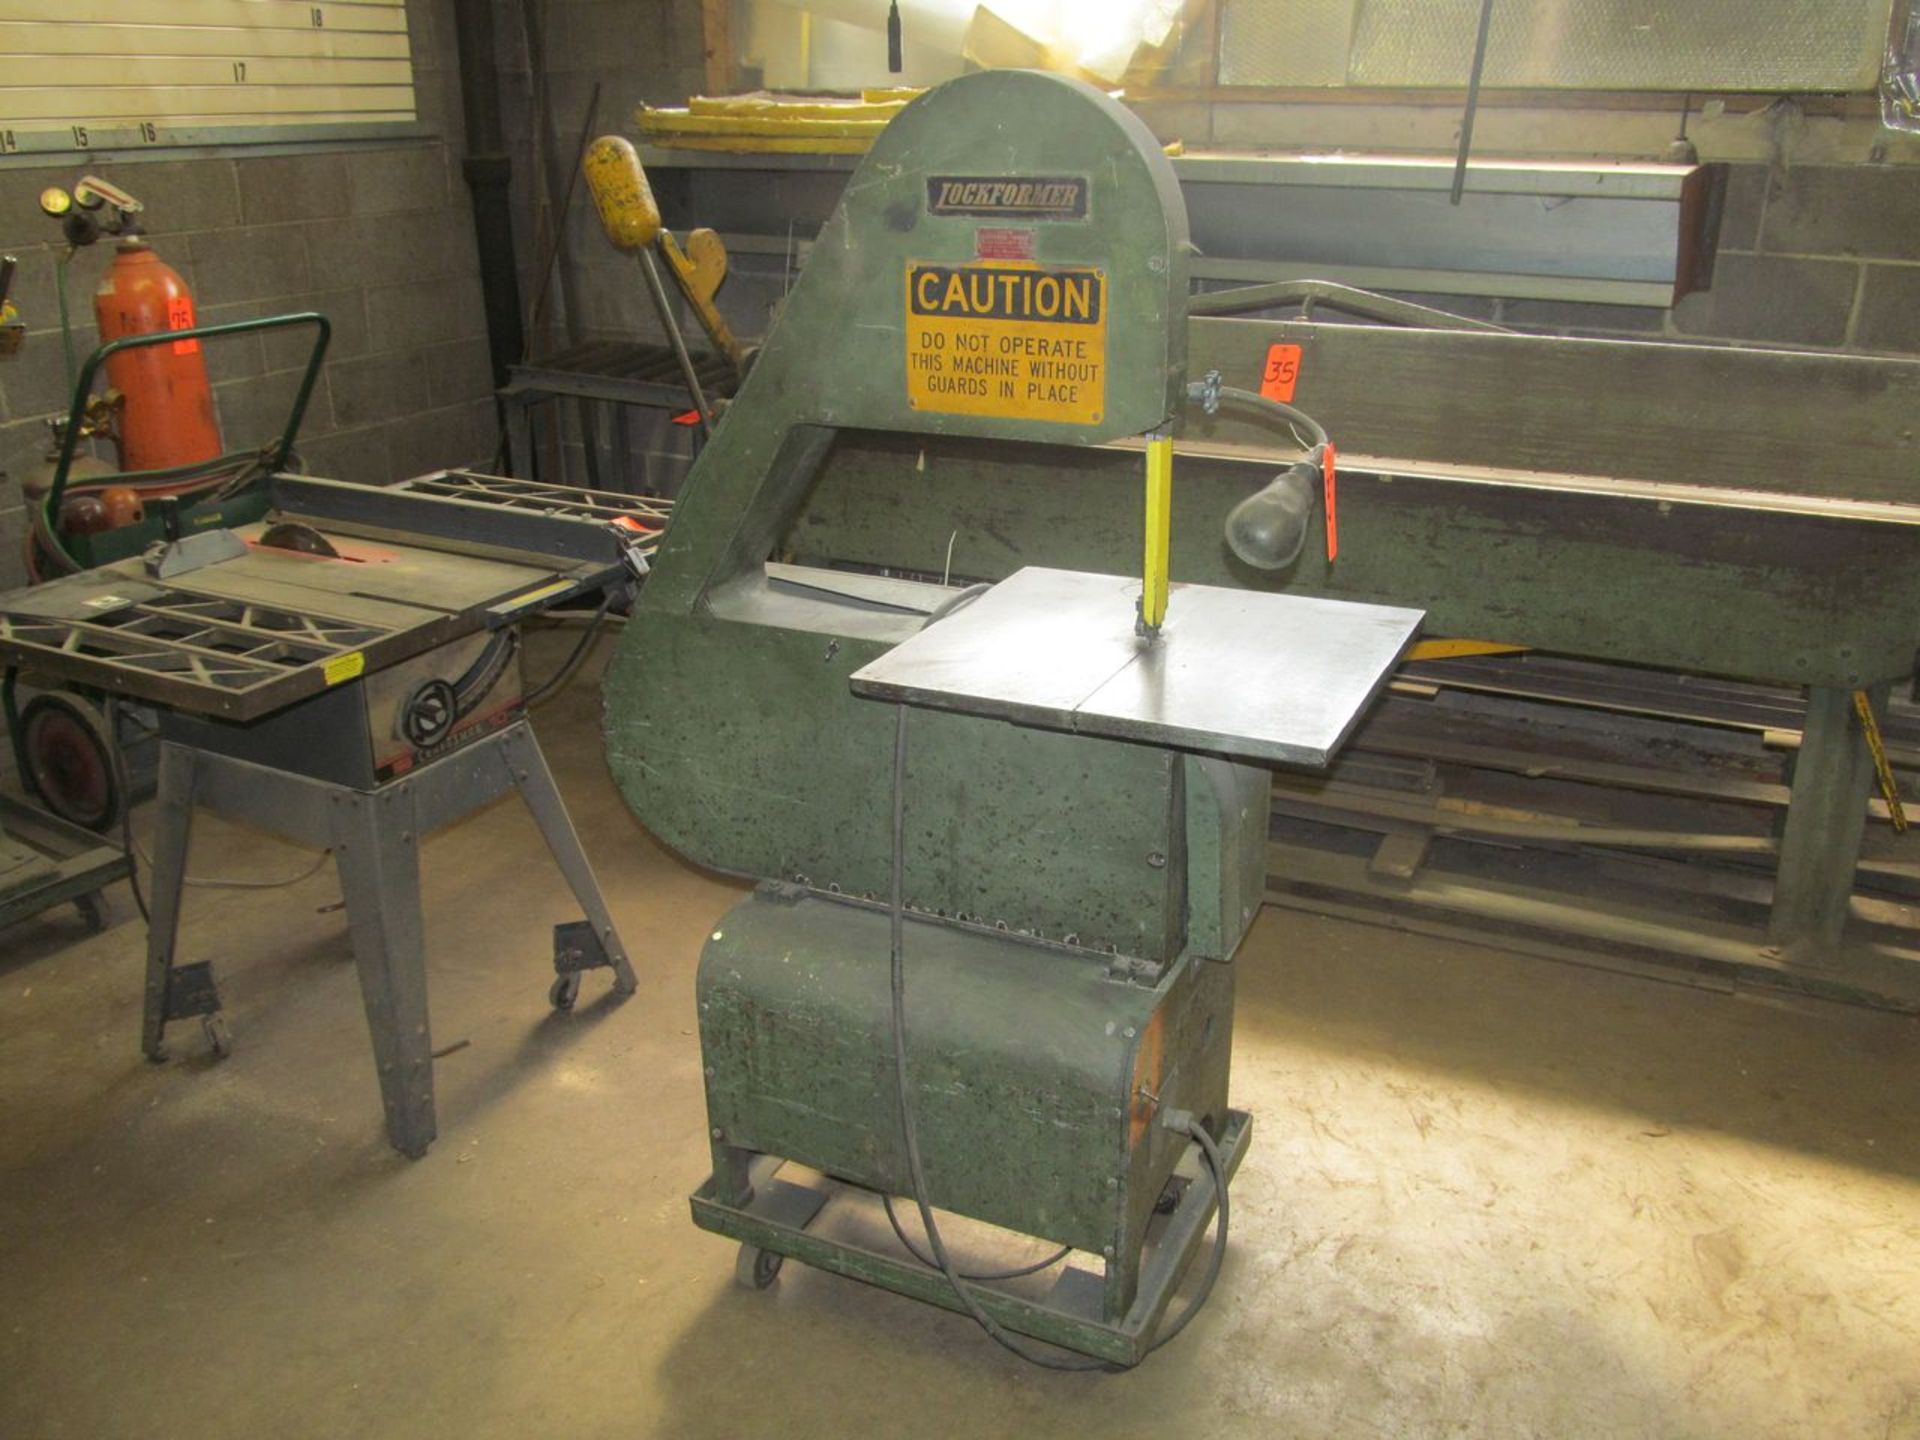 Lockformer Model 24-S Bett-Marr Vertical Band Saw, S/N: 3211; with 24 in. Throat, on Portable Stand - Image 2 of 7